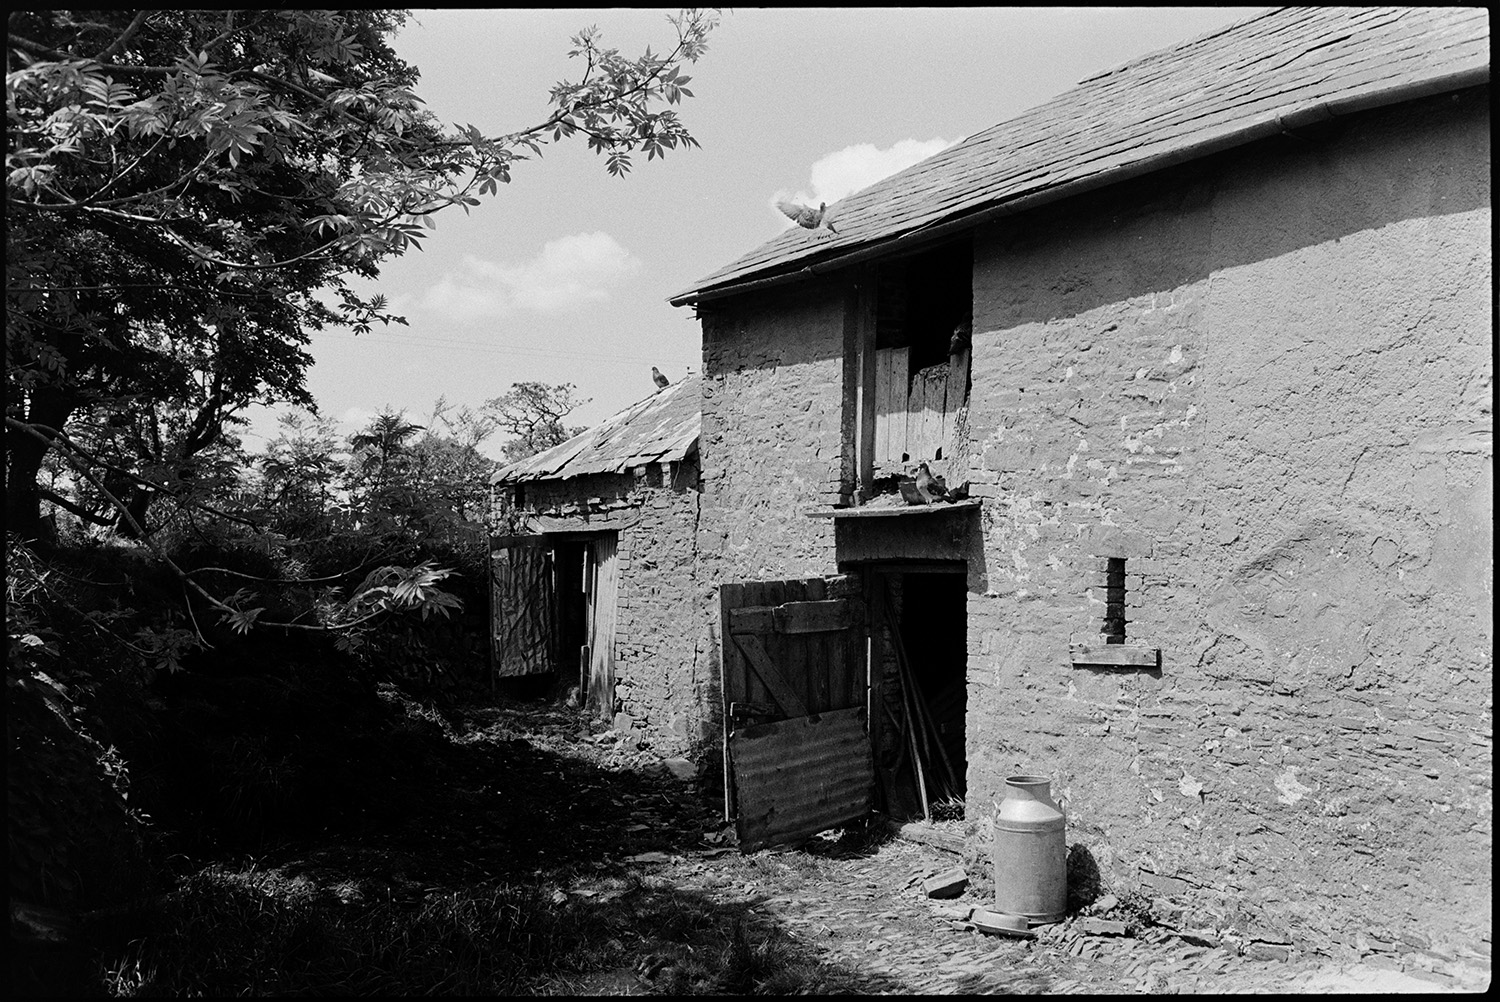 Farmyard with cobbles, barn and corrugated iron shed, bath as water trough.
[Birds sitting on a barn with open doors and a tallet at Mount Pleasant, Beamsworthy. A milk churn is outside the barn doorway.]